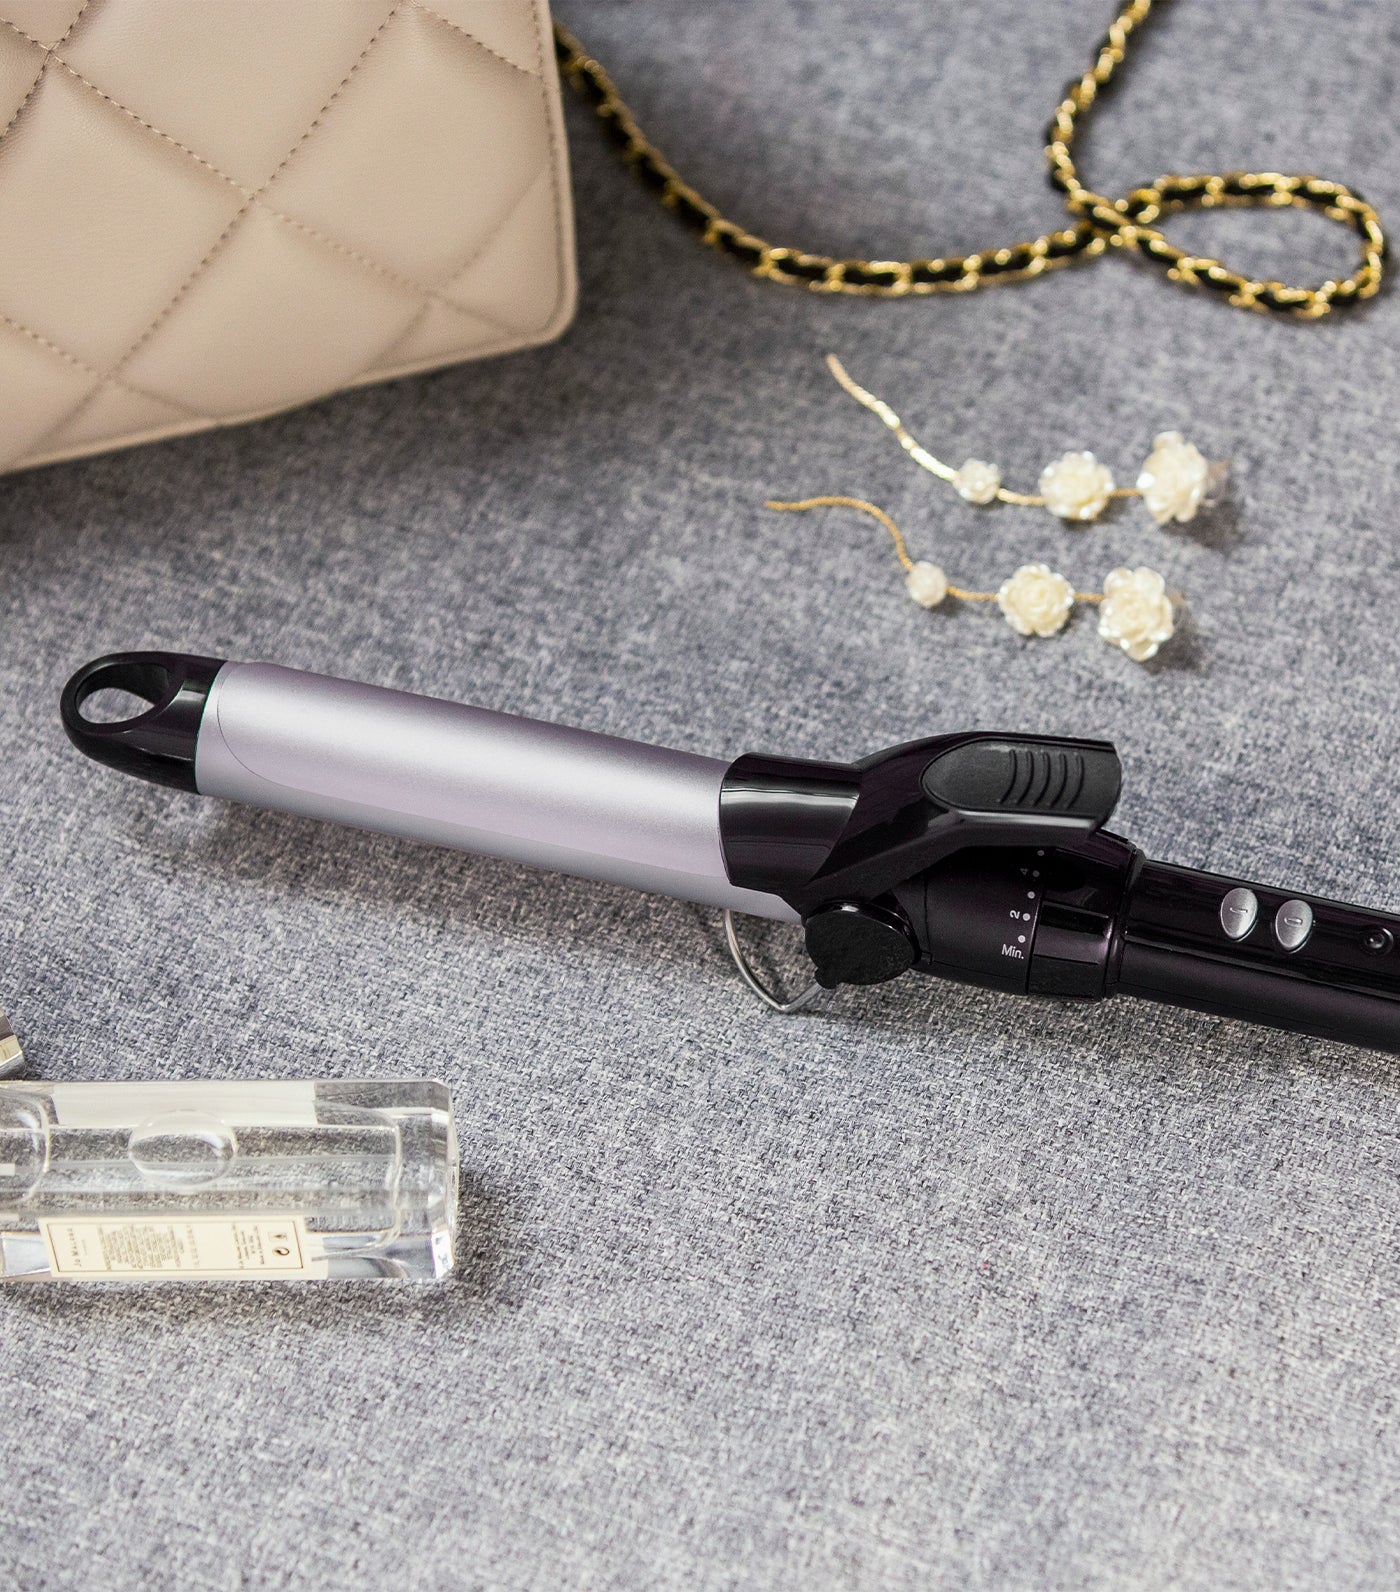 25mm Sublim’ Touch Pro 180 Curling Iron